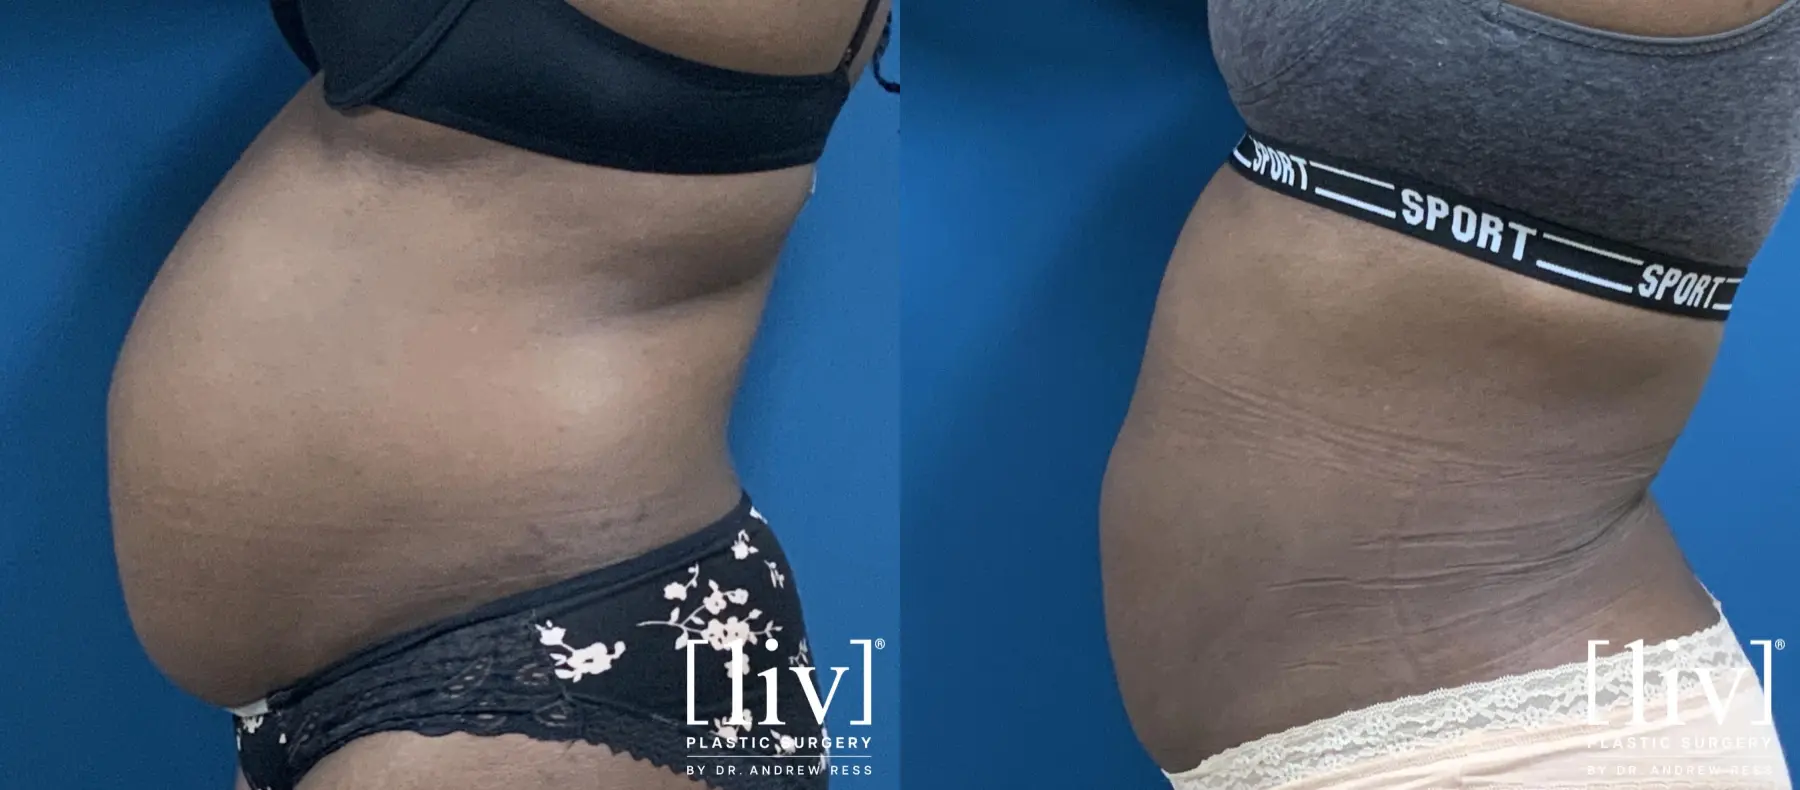 Liposuction - Before and After 1